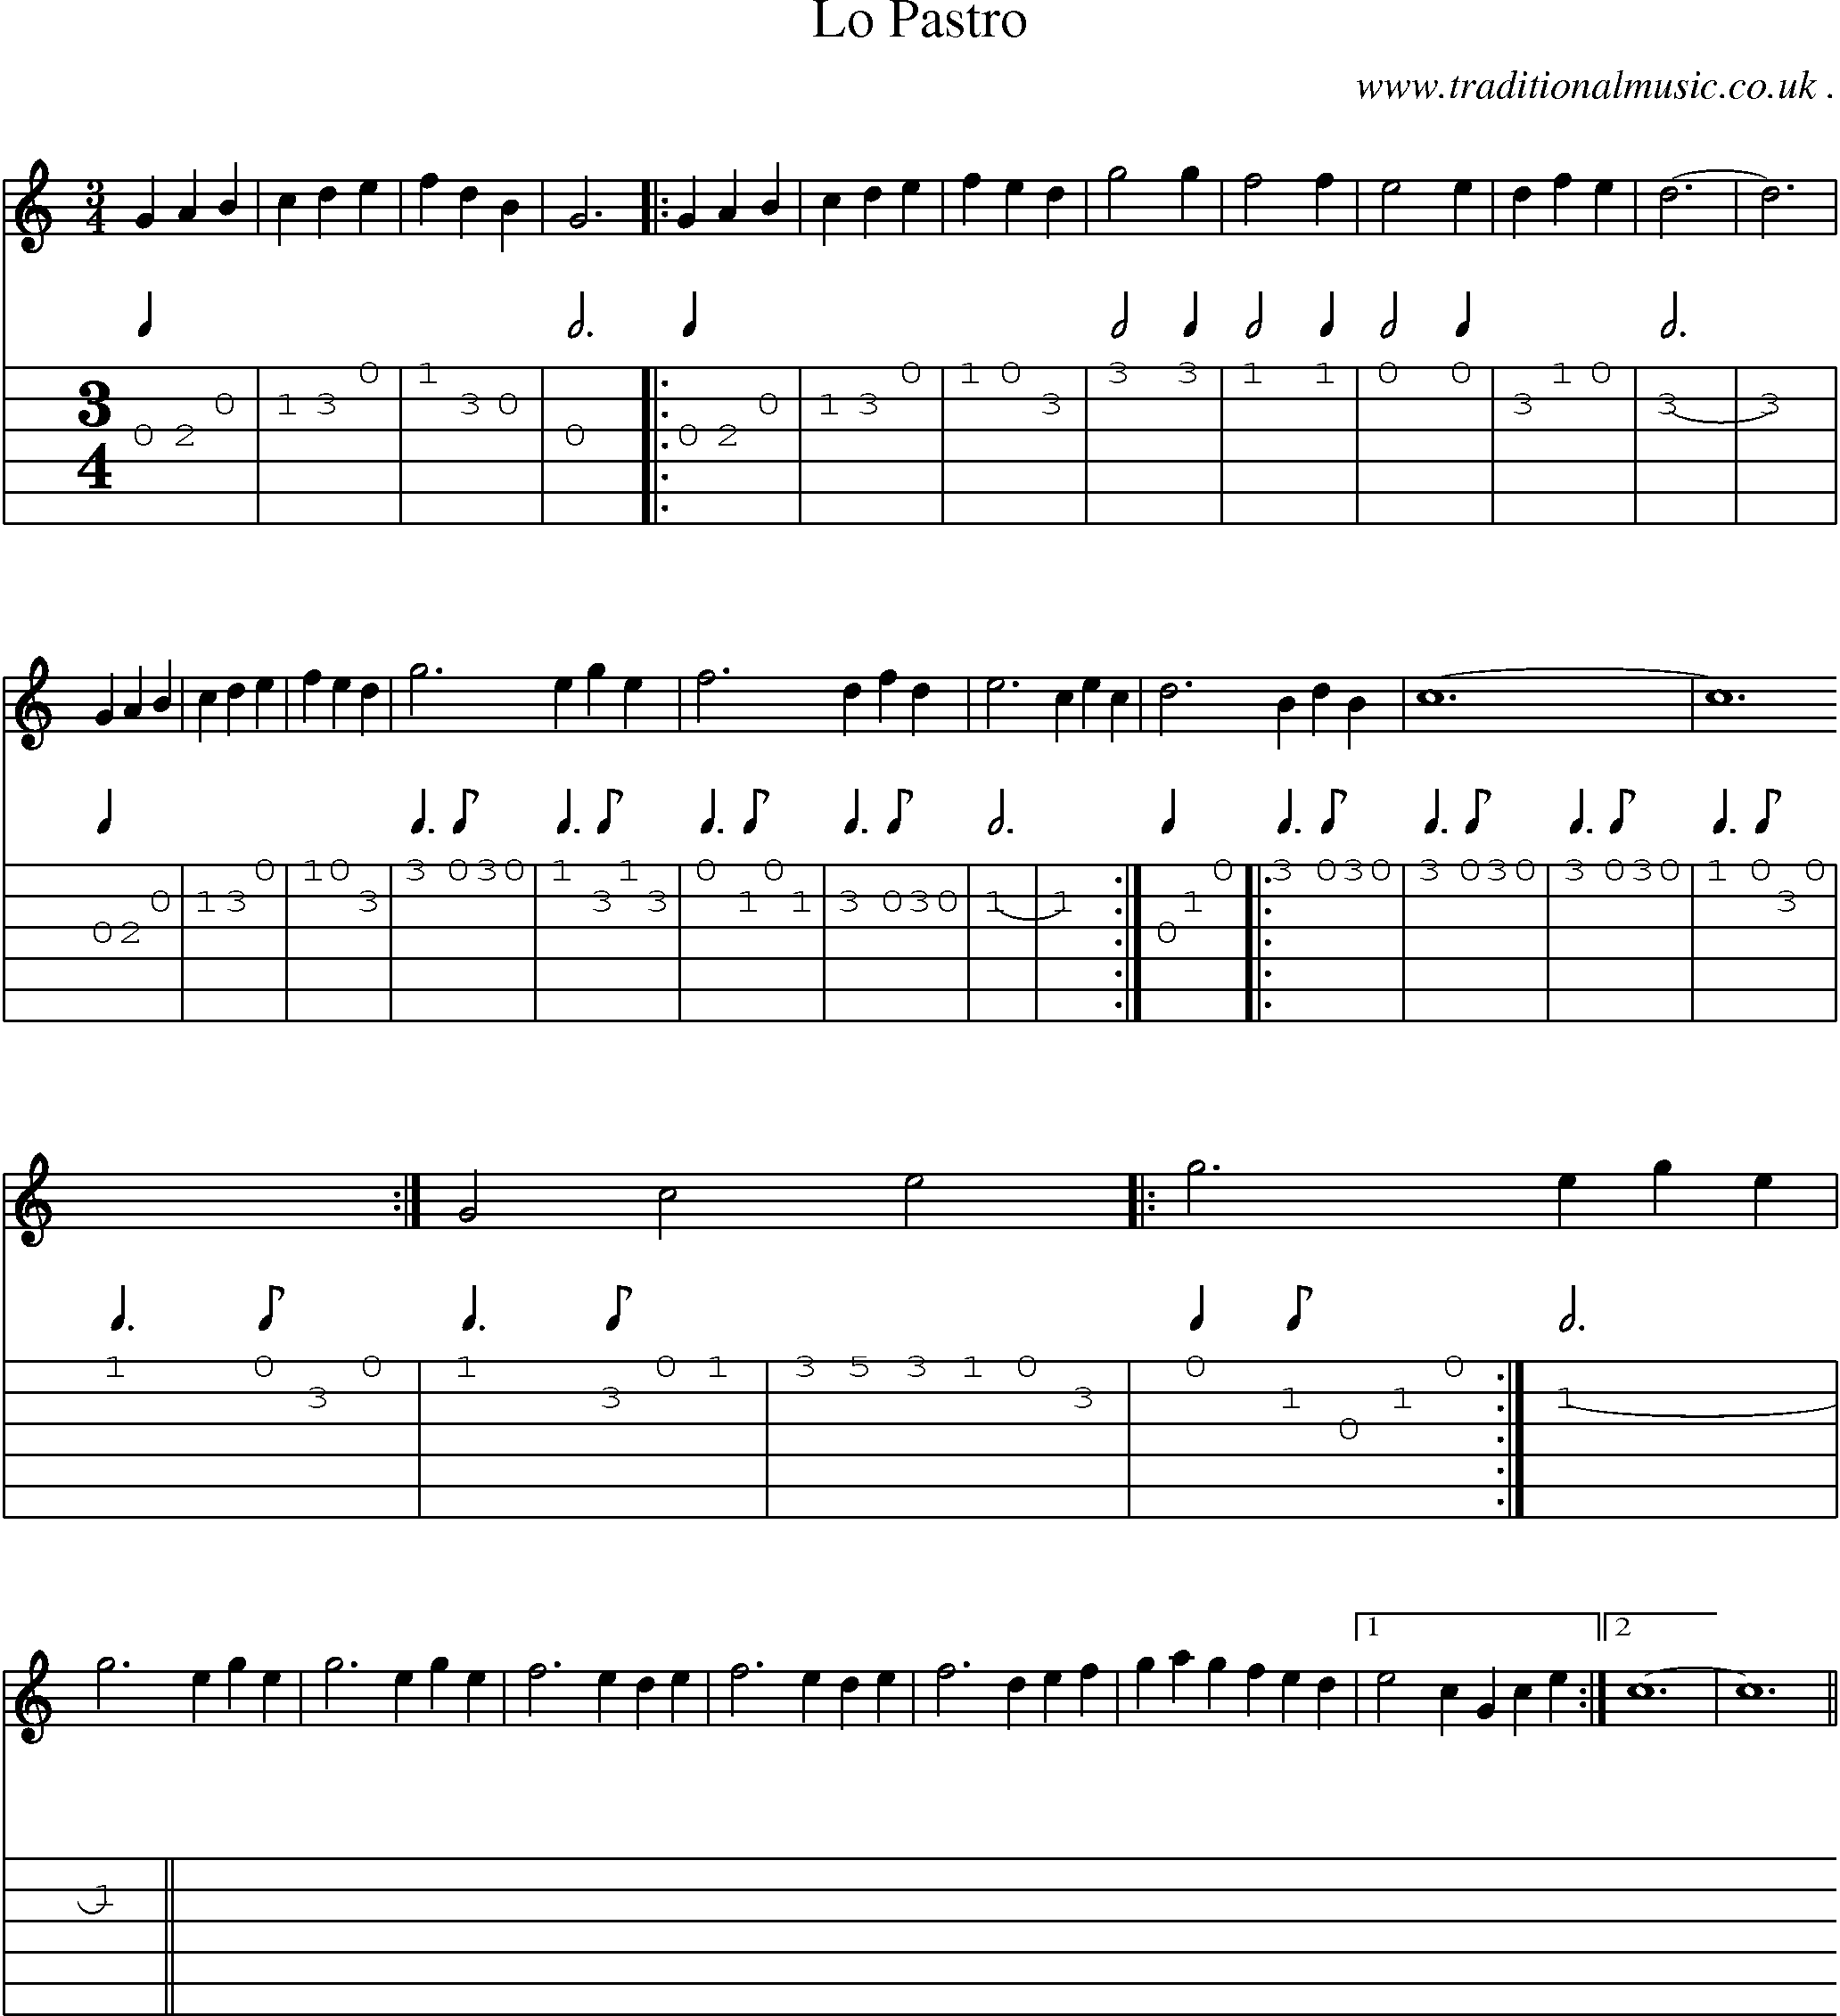 Sheet-Music and Guitar Tabs for Lo Pastro